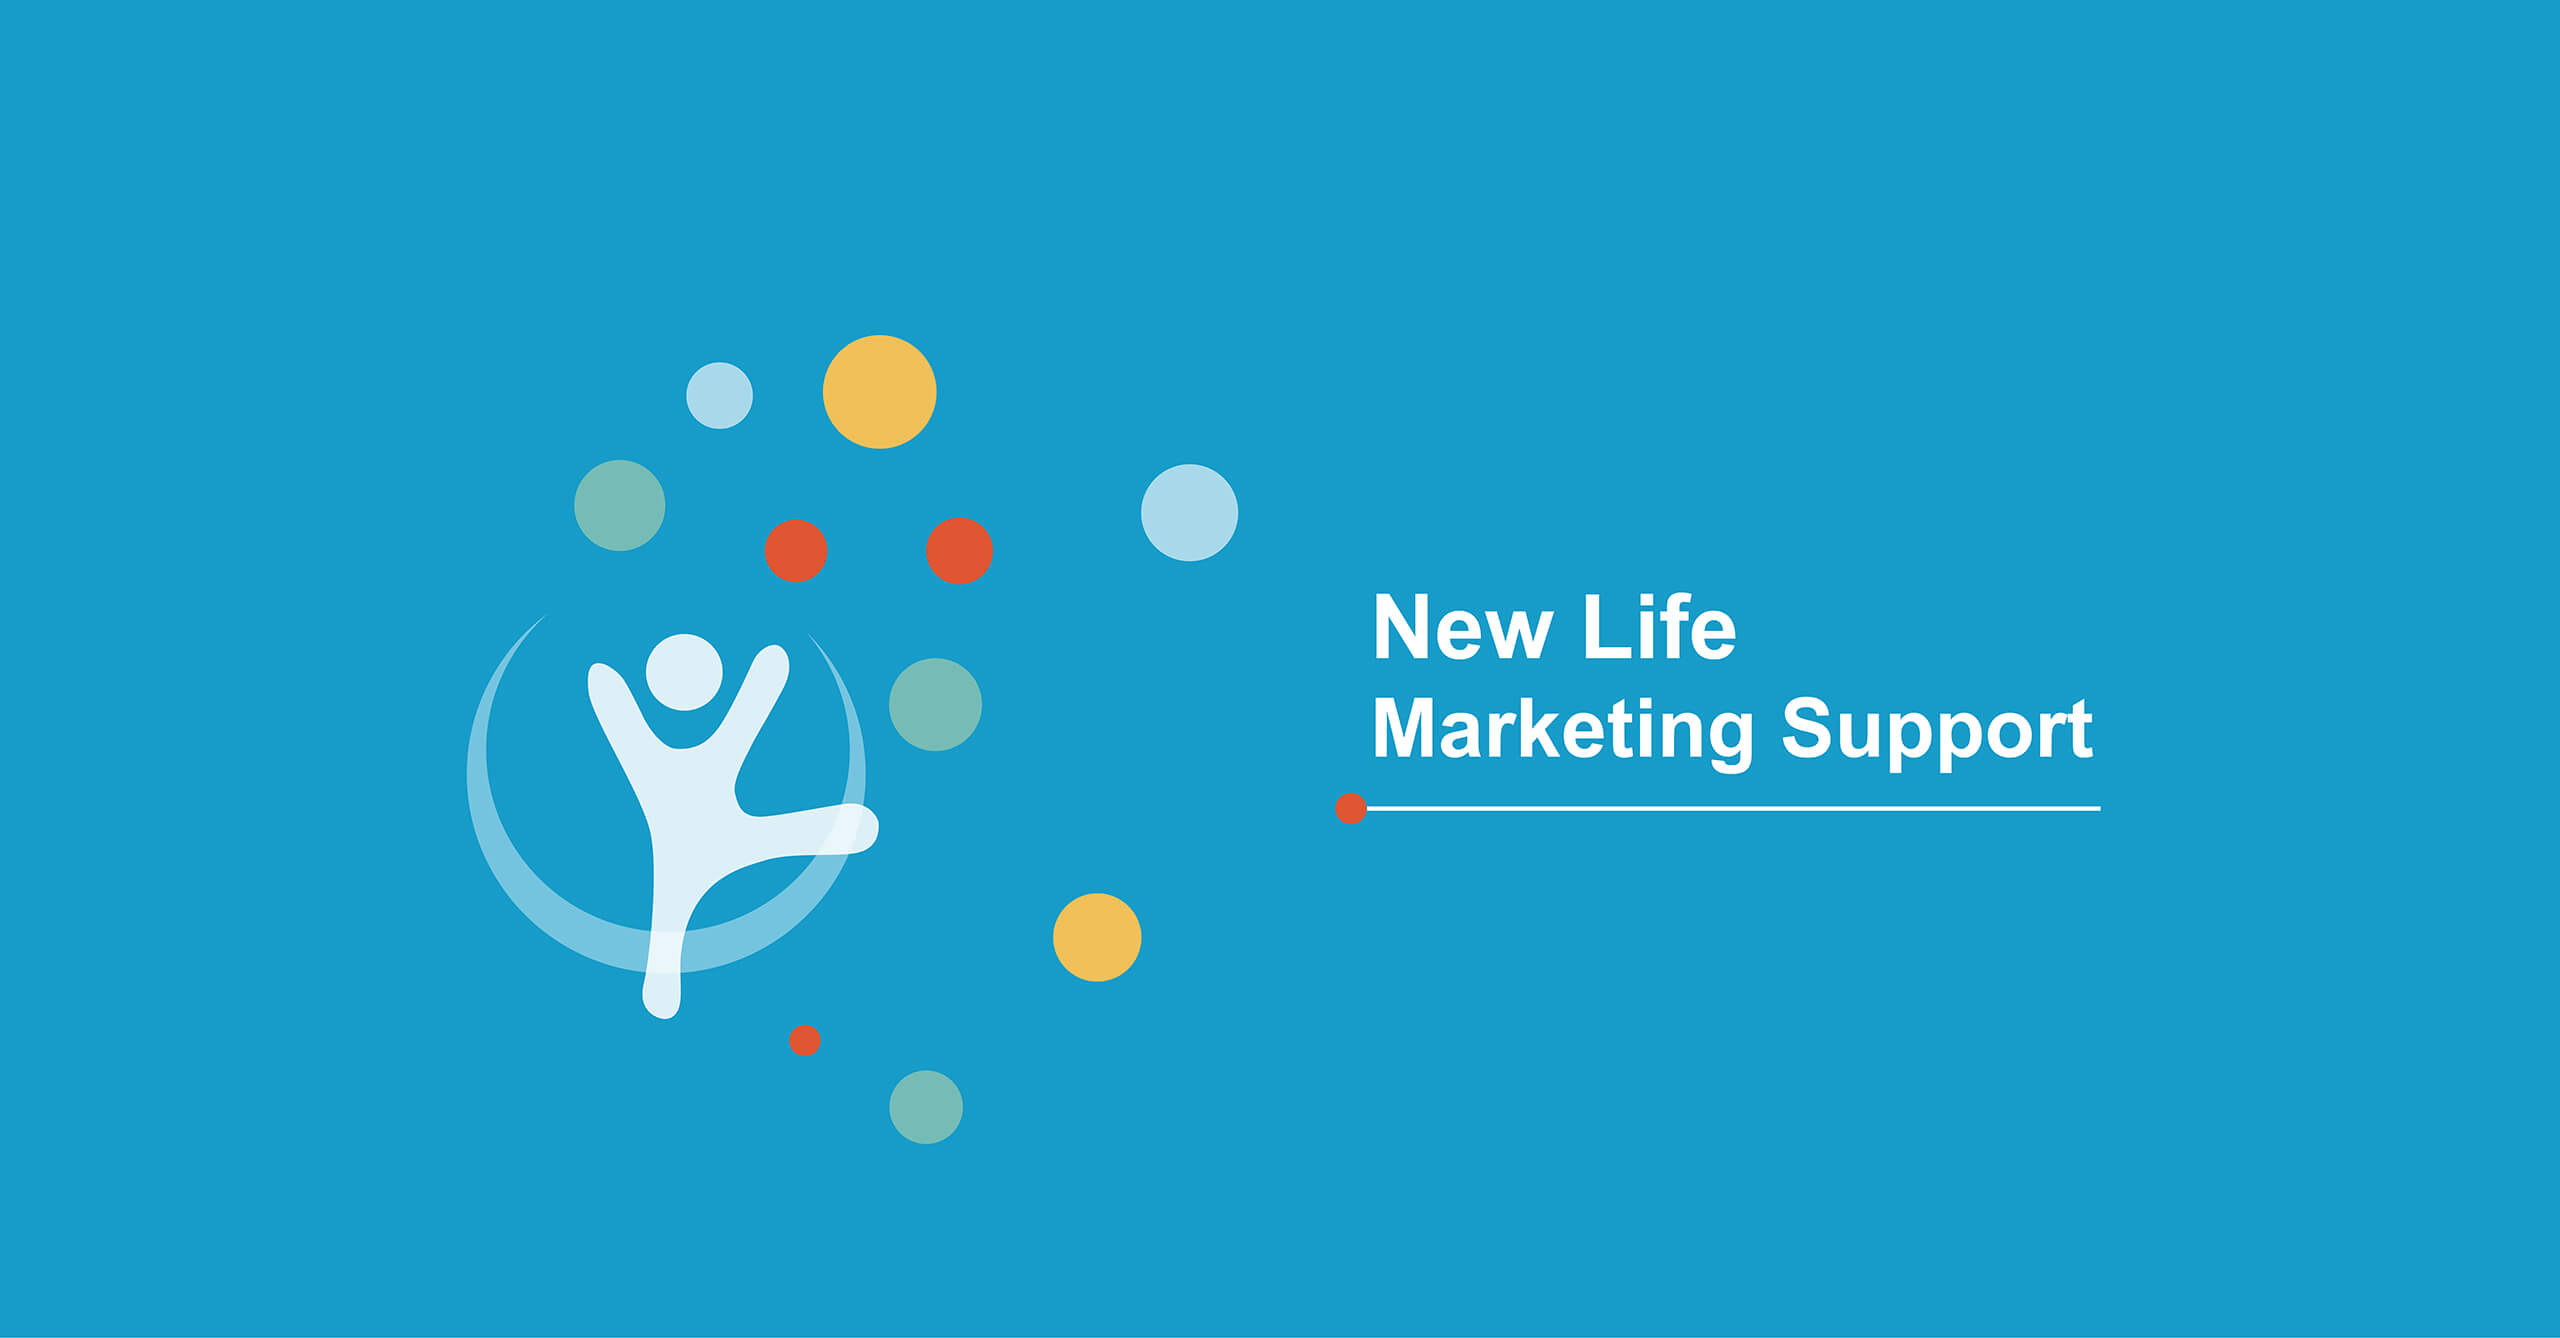 New Life Marketing Support